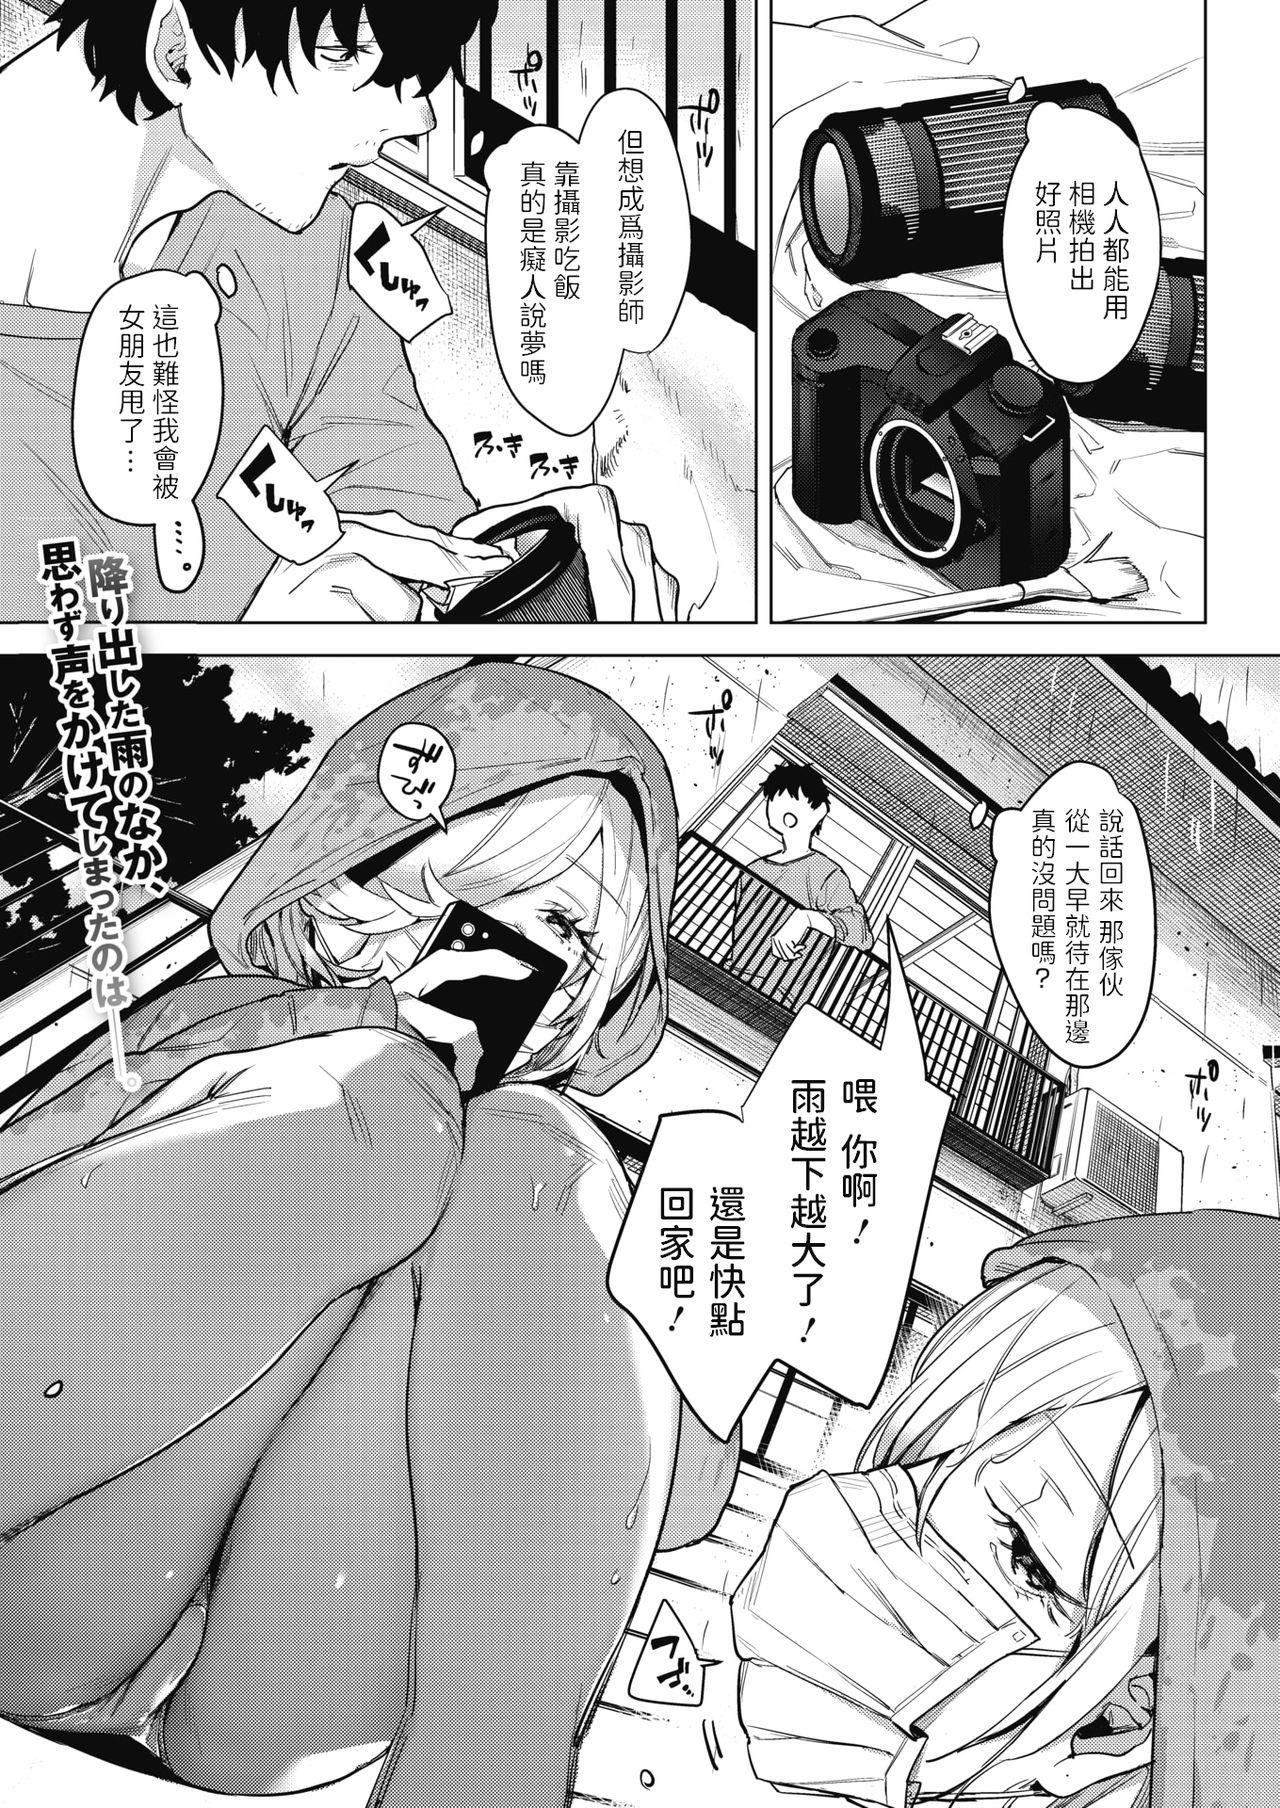 Brother Sister [2no.] 淫雨がやむまで (コミックホットミルク 2020年12月号) 中文翻譯 Gemendo - Page 1